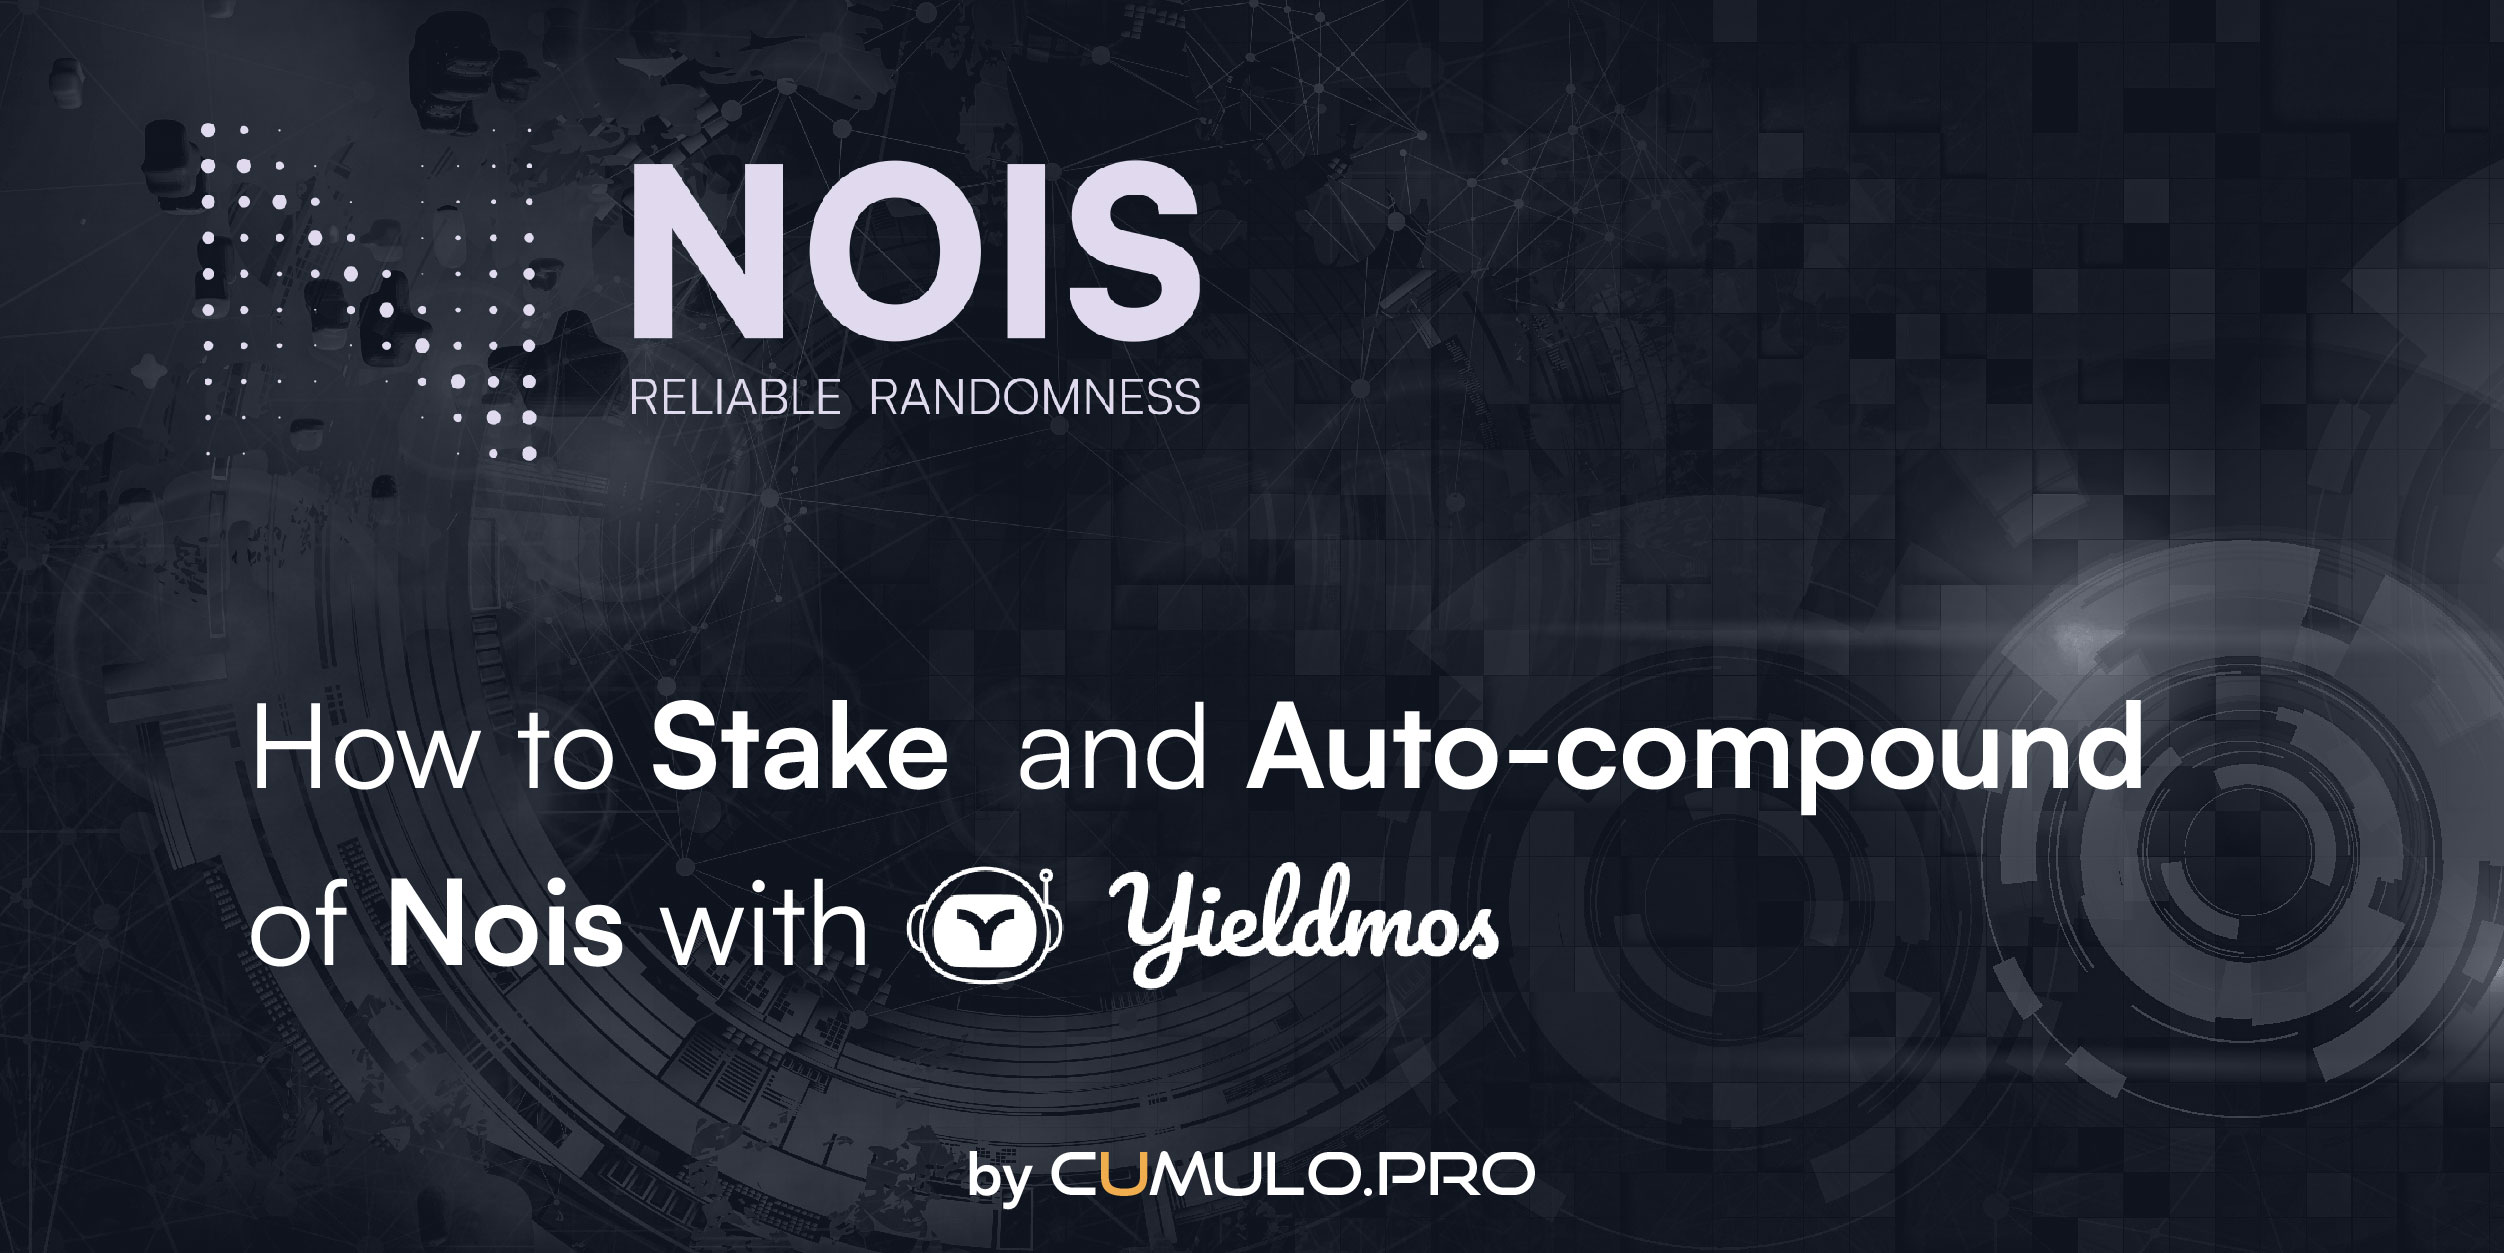 How to Stake and Auto-compund of NOIS with Yieldmos